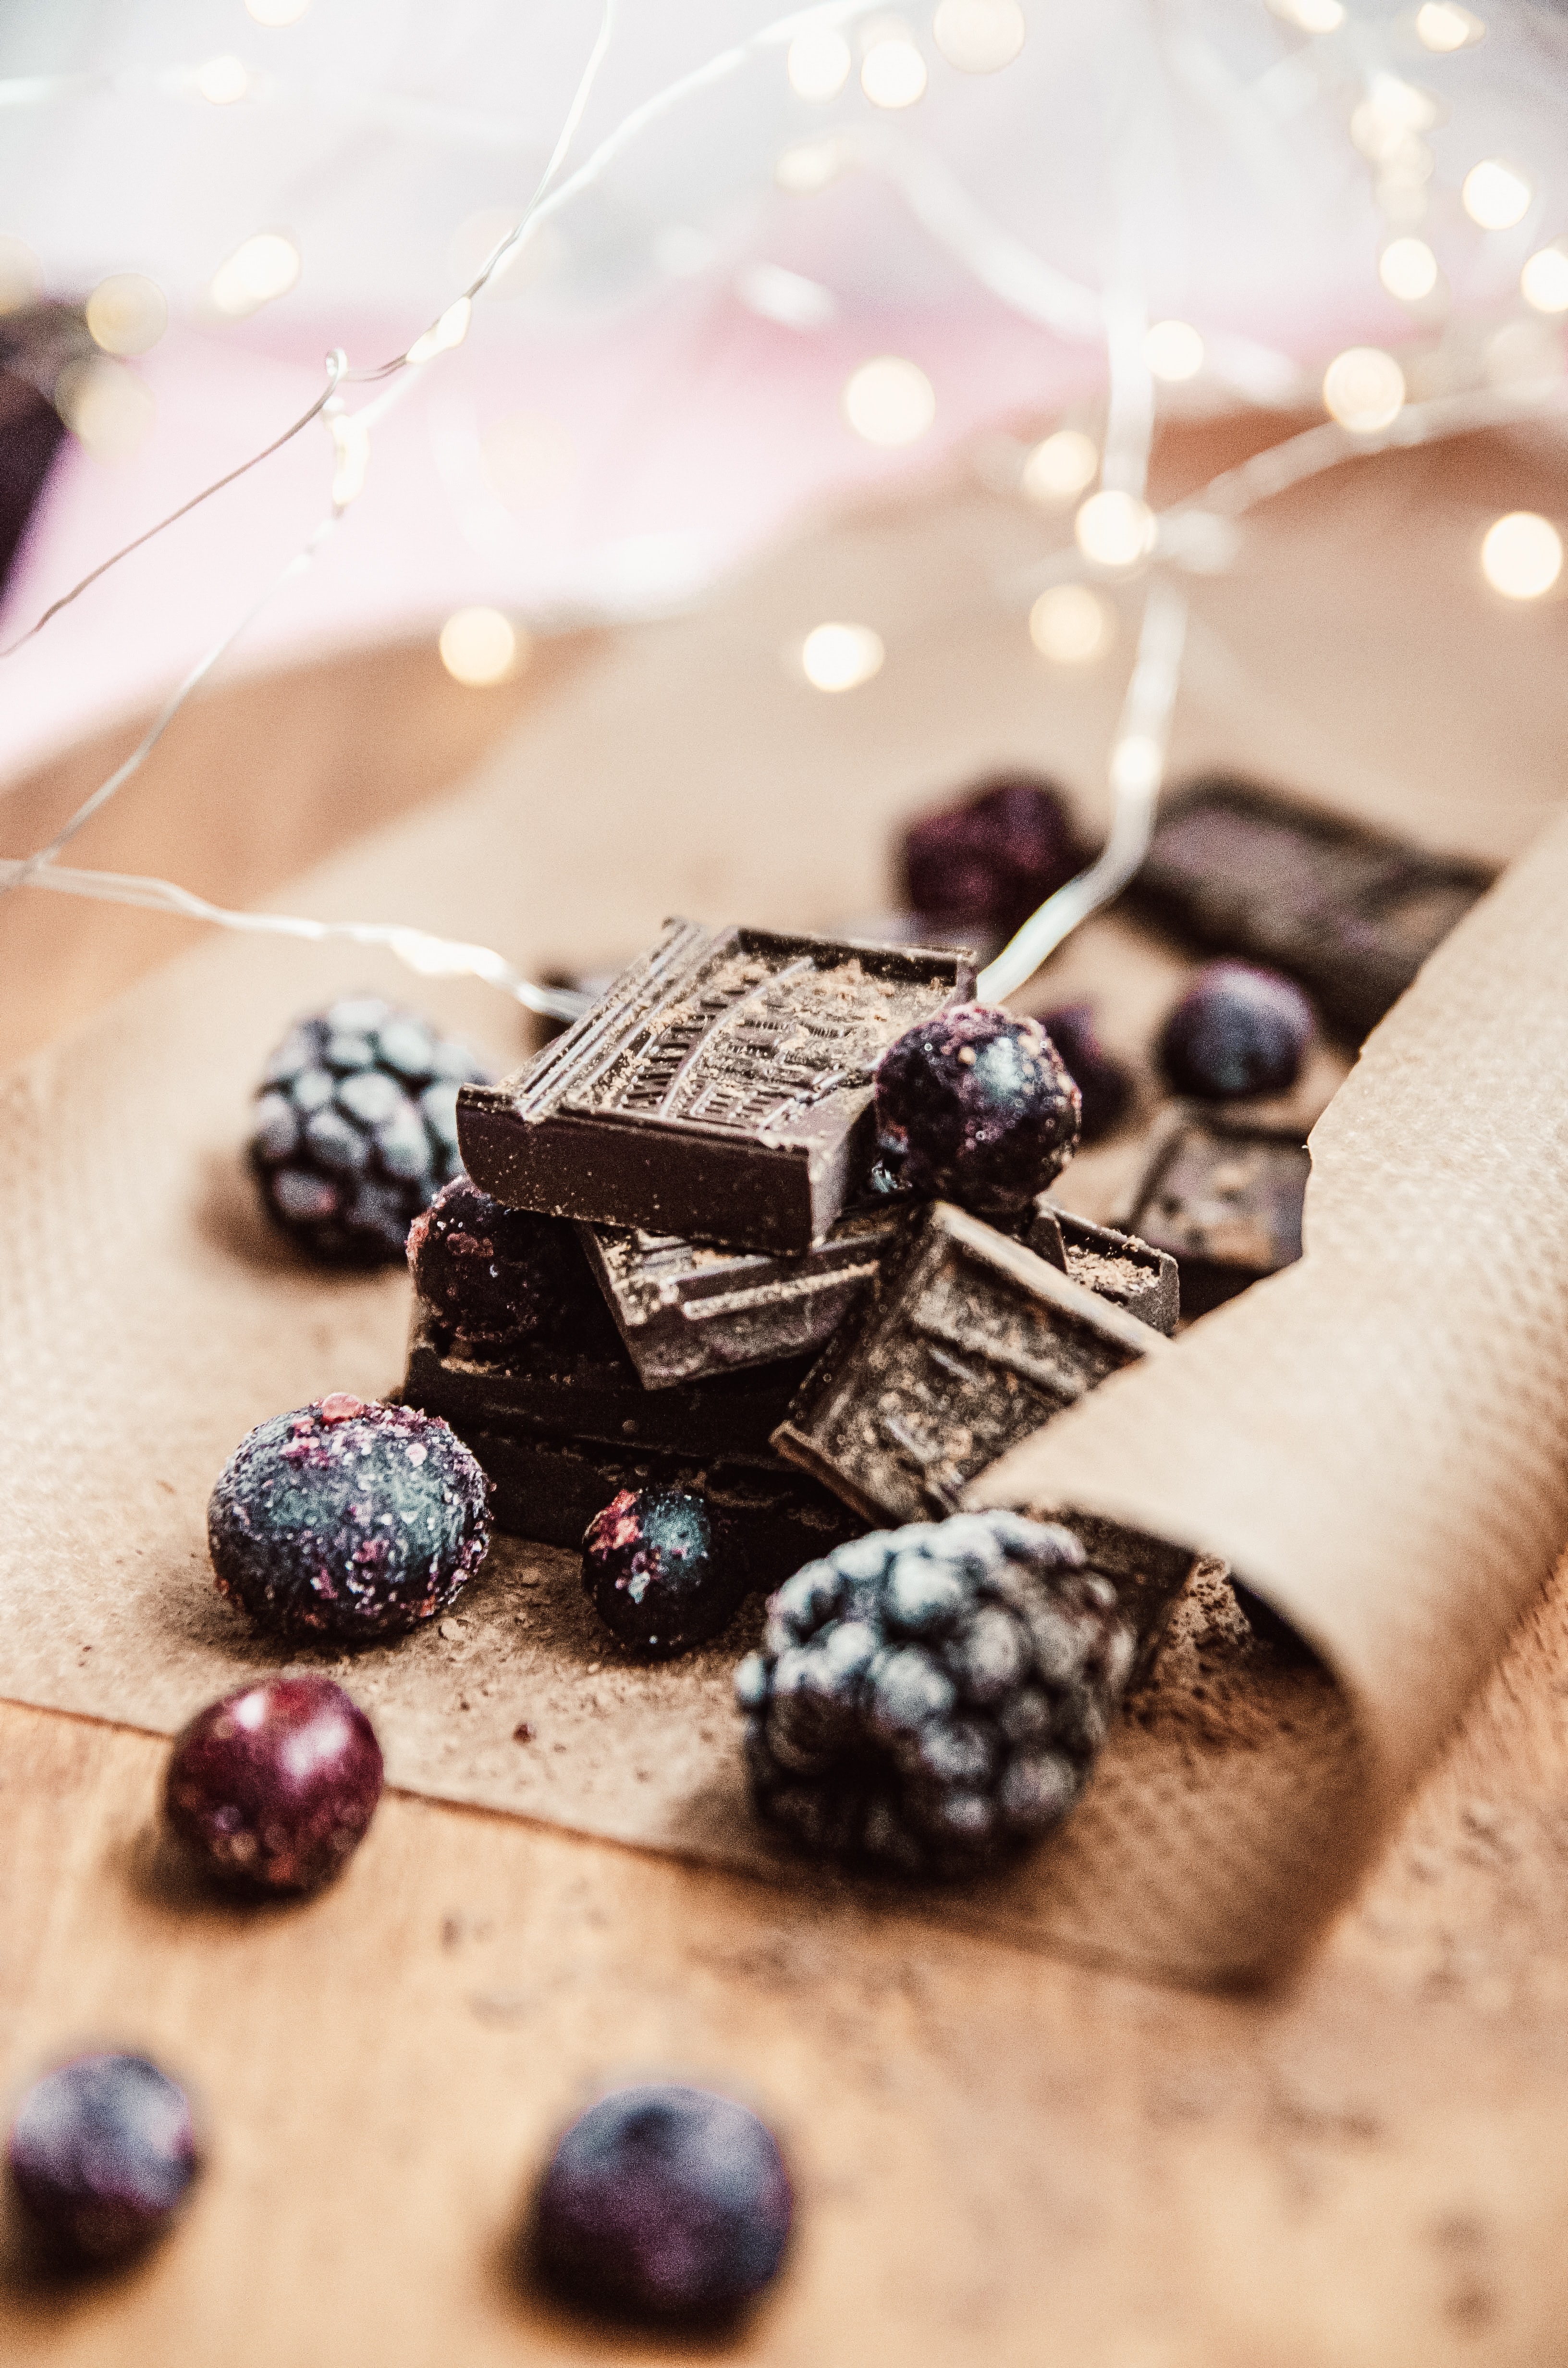 149625 download wallpaper chocolate, food, desert, berries, garland screensavers and pictures for free